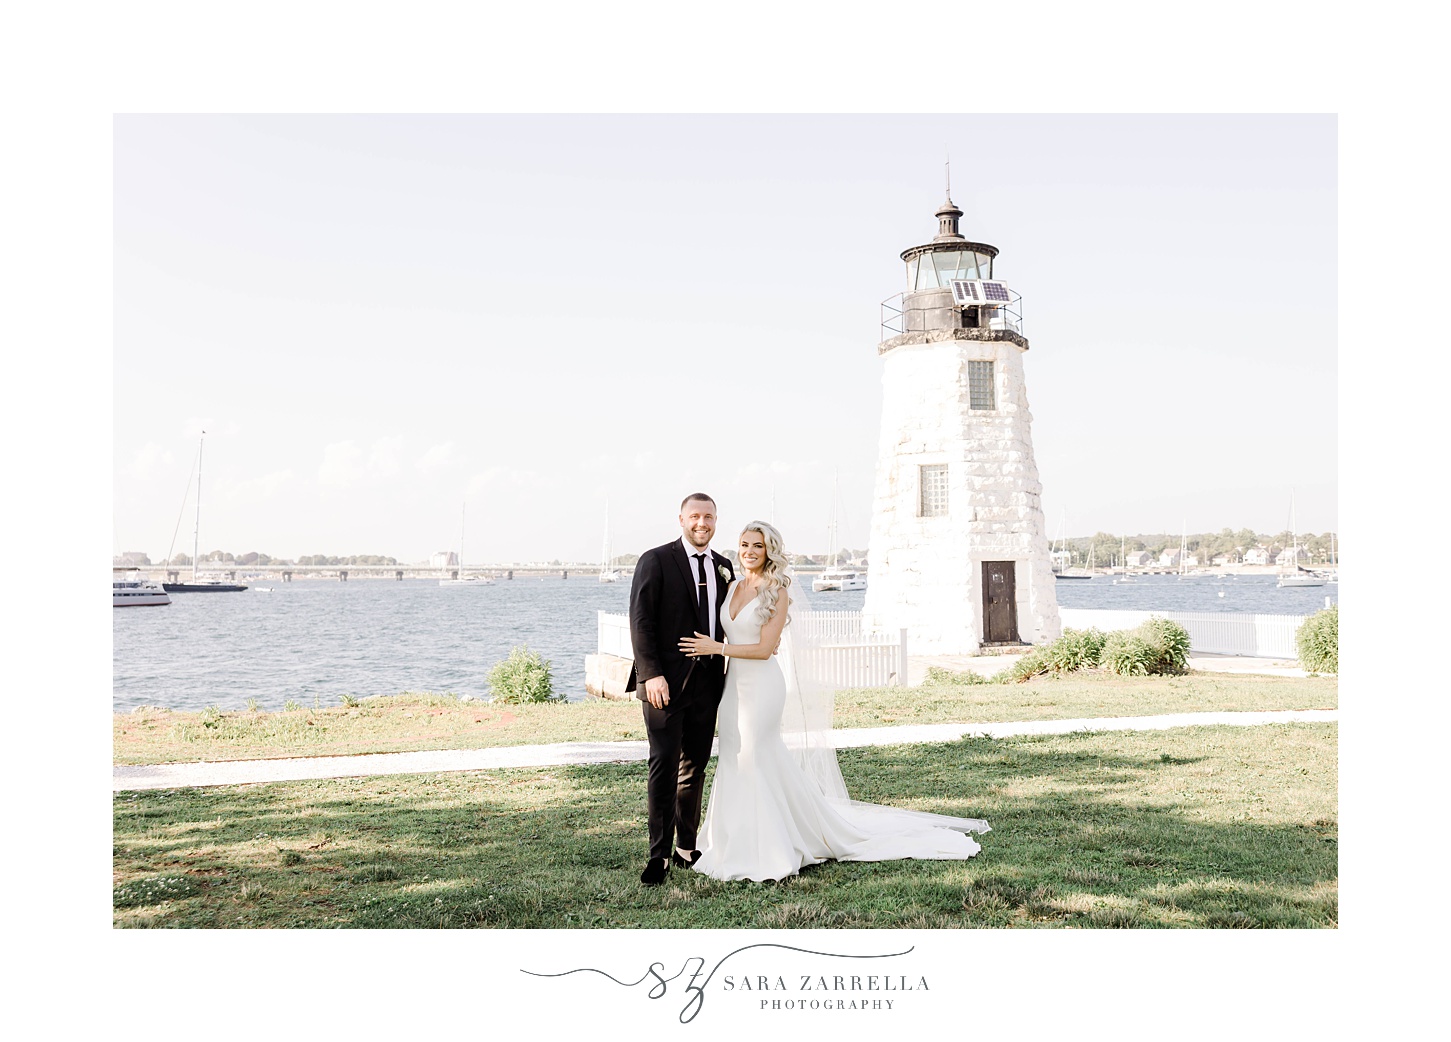 newlyweds pose by Newport lighthouse during photos in Rhode Island